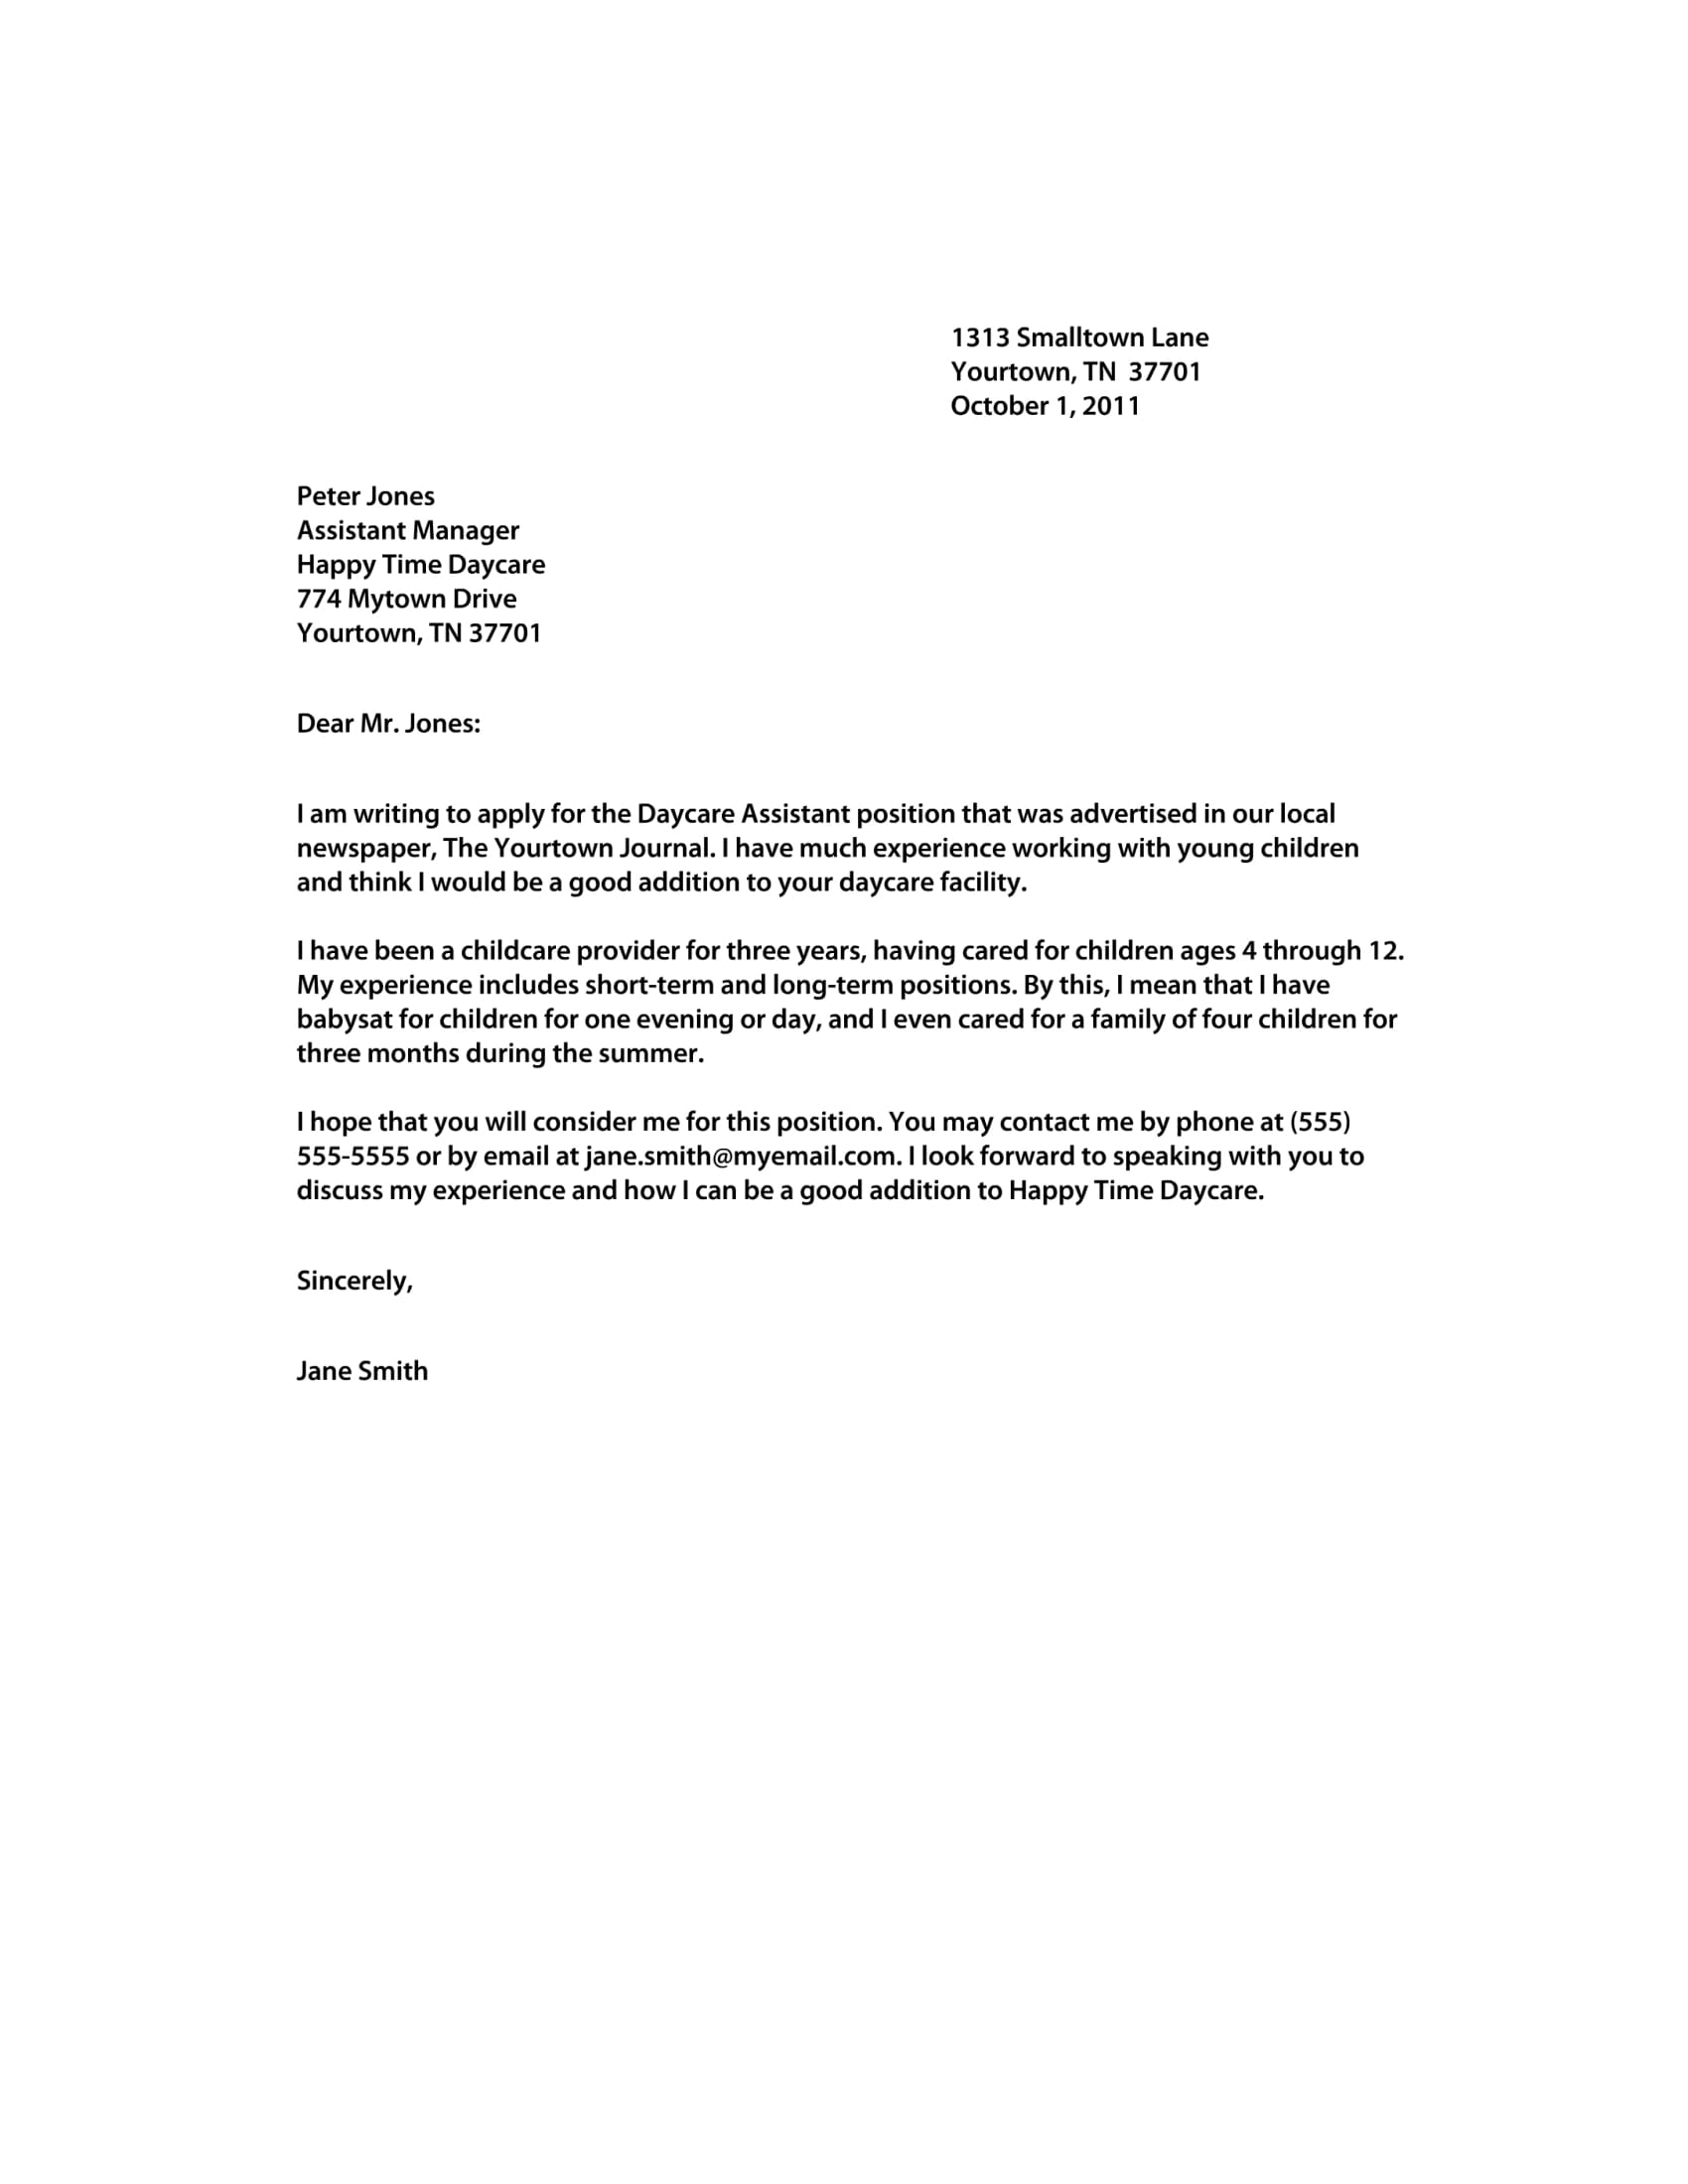 pdf of cover letter